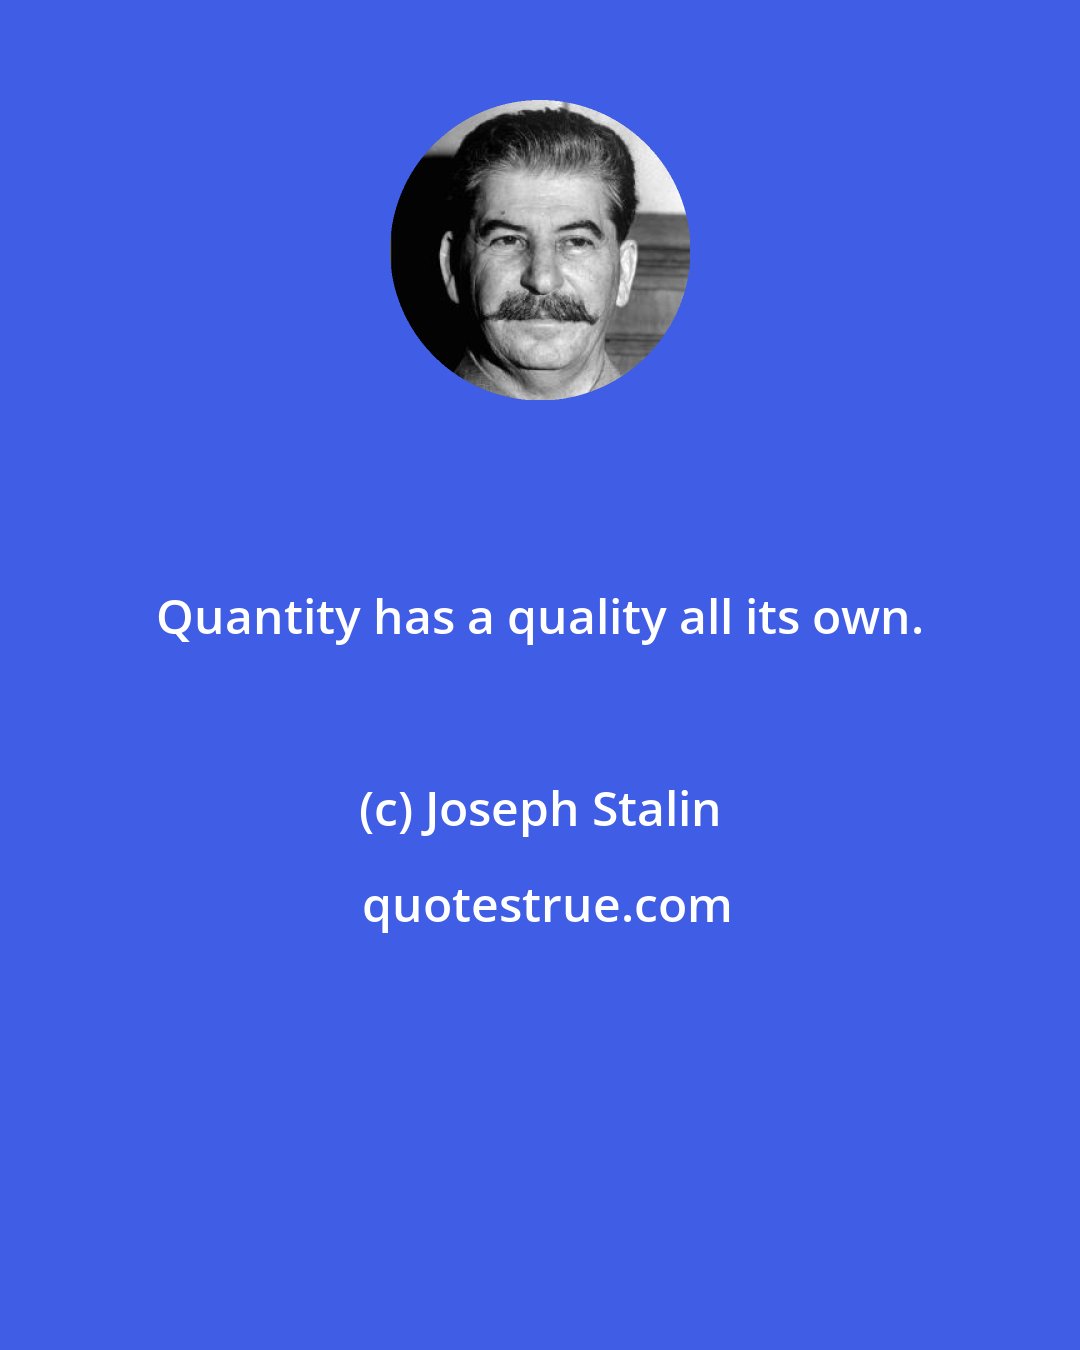 Joseph Stalin: Quantity has a quality all its own.